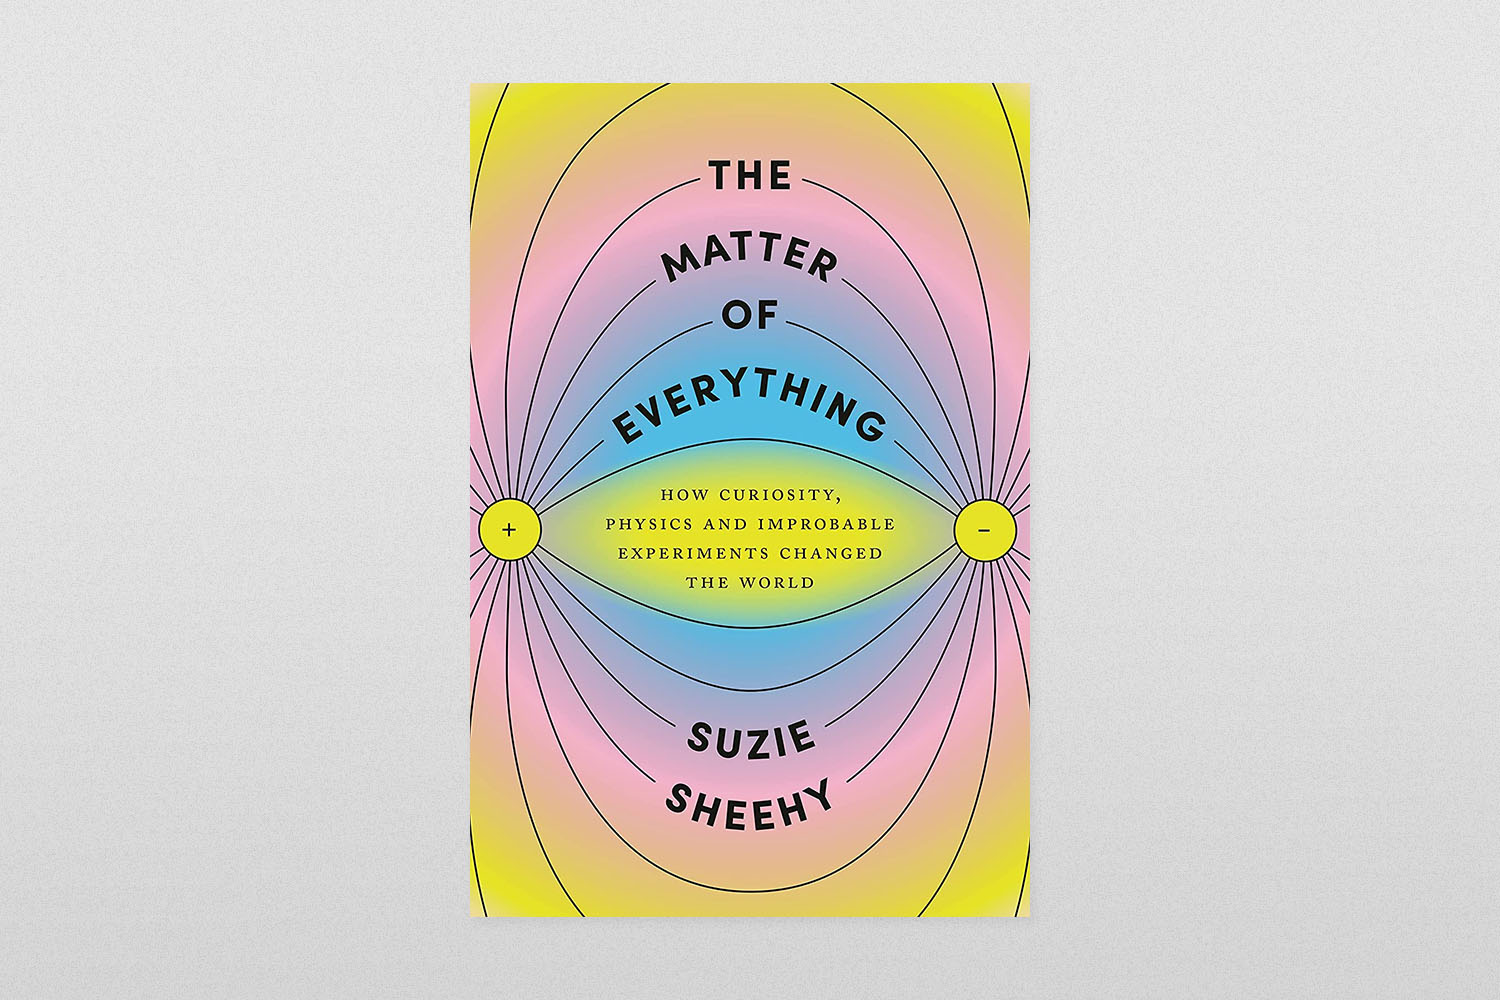 The Matter of Everything- How Curiosity, Physics, and Improbable Experiments Changed the World